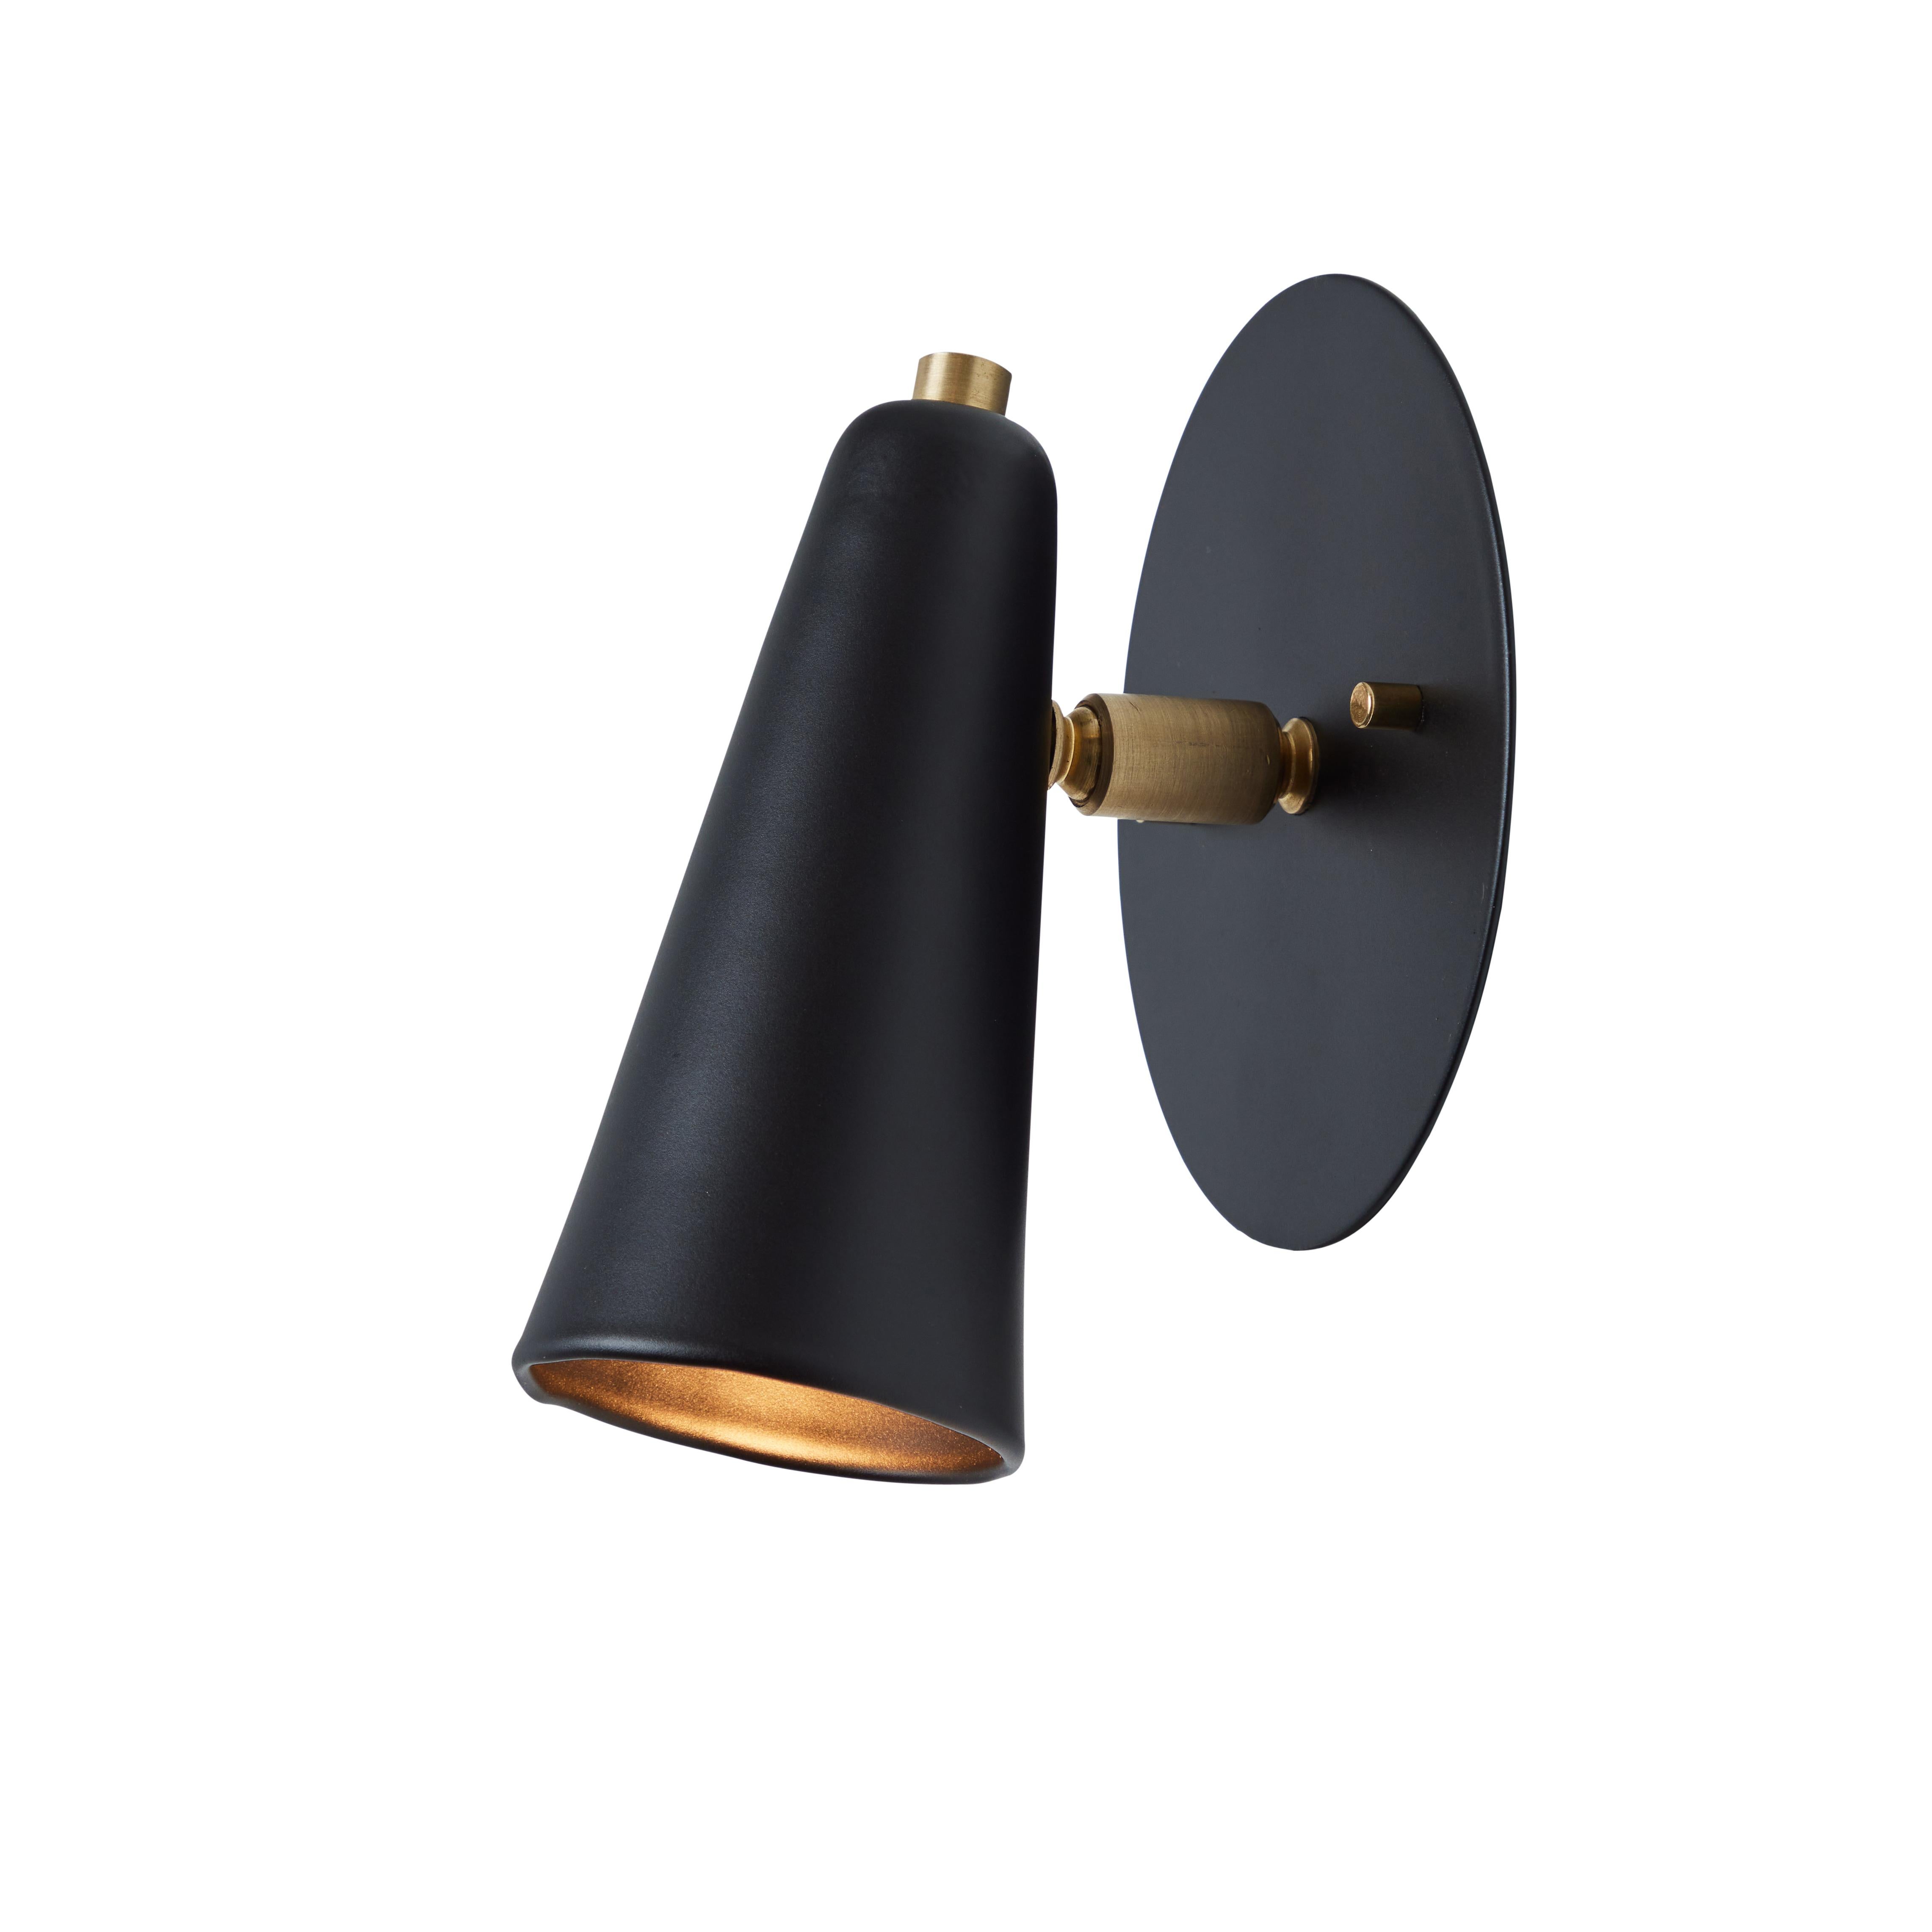 Pair of 'Lupita' sconces in black and brass by Alvaro Benitez. 

Hand-fabricated by Los Angeles based designer and lighting professional Alvaro Benitez, these highly refined and highly adjustable sconces are reminiscent of the iconic midcentury